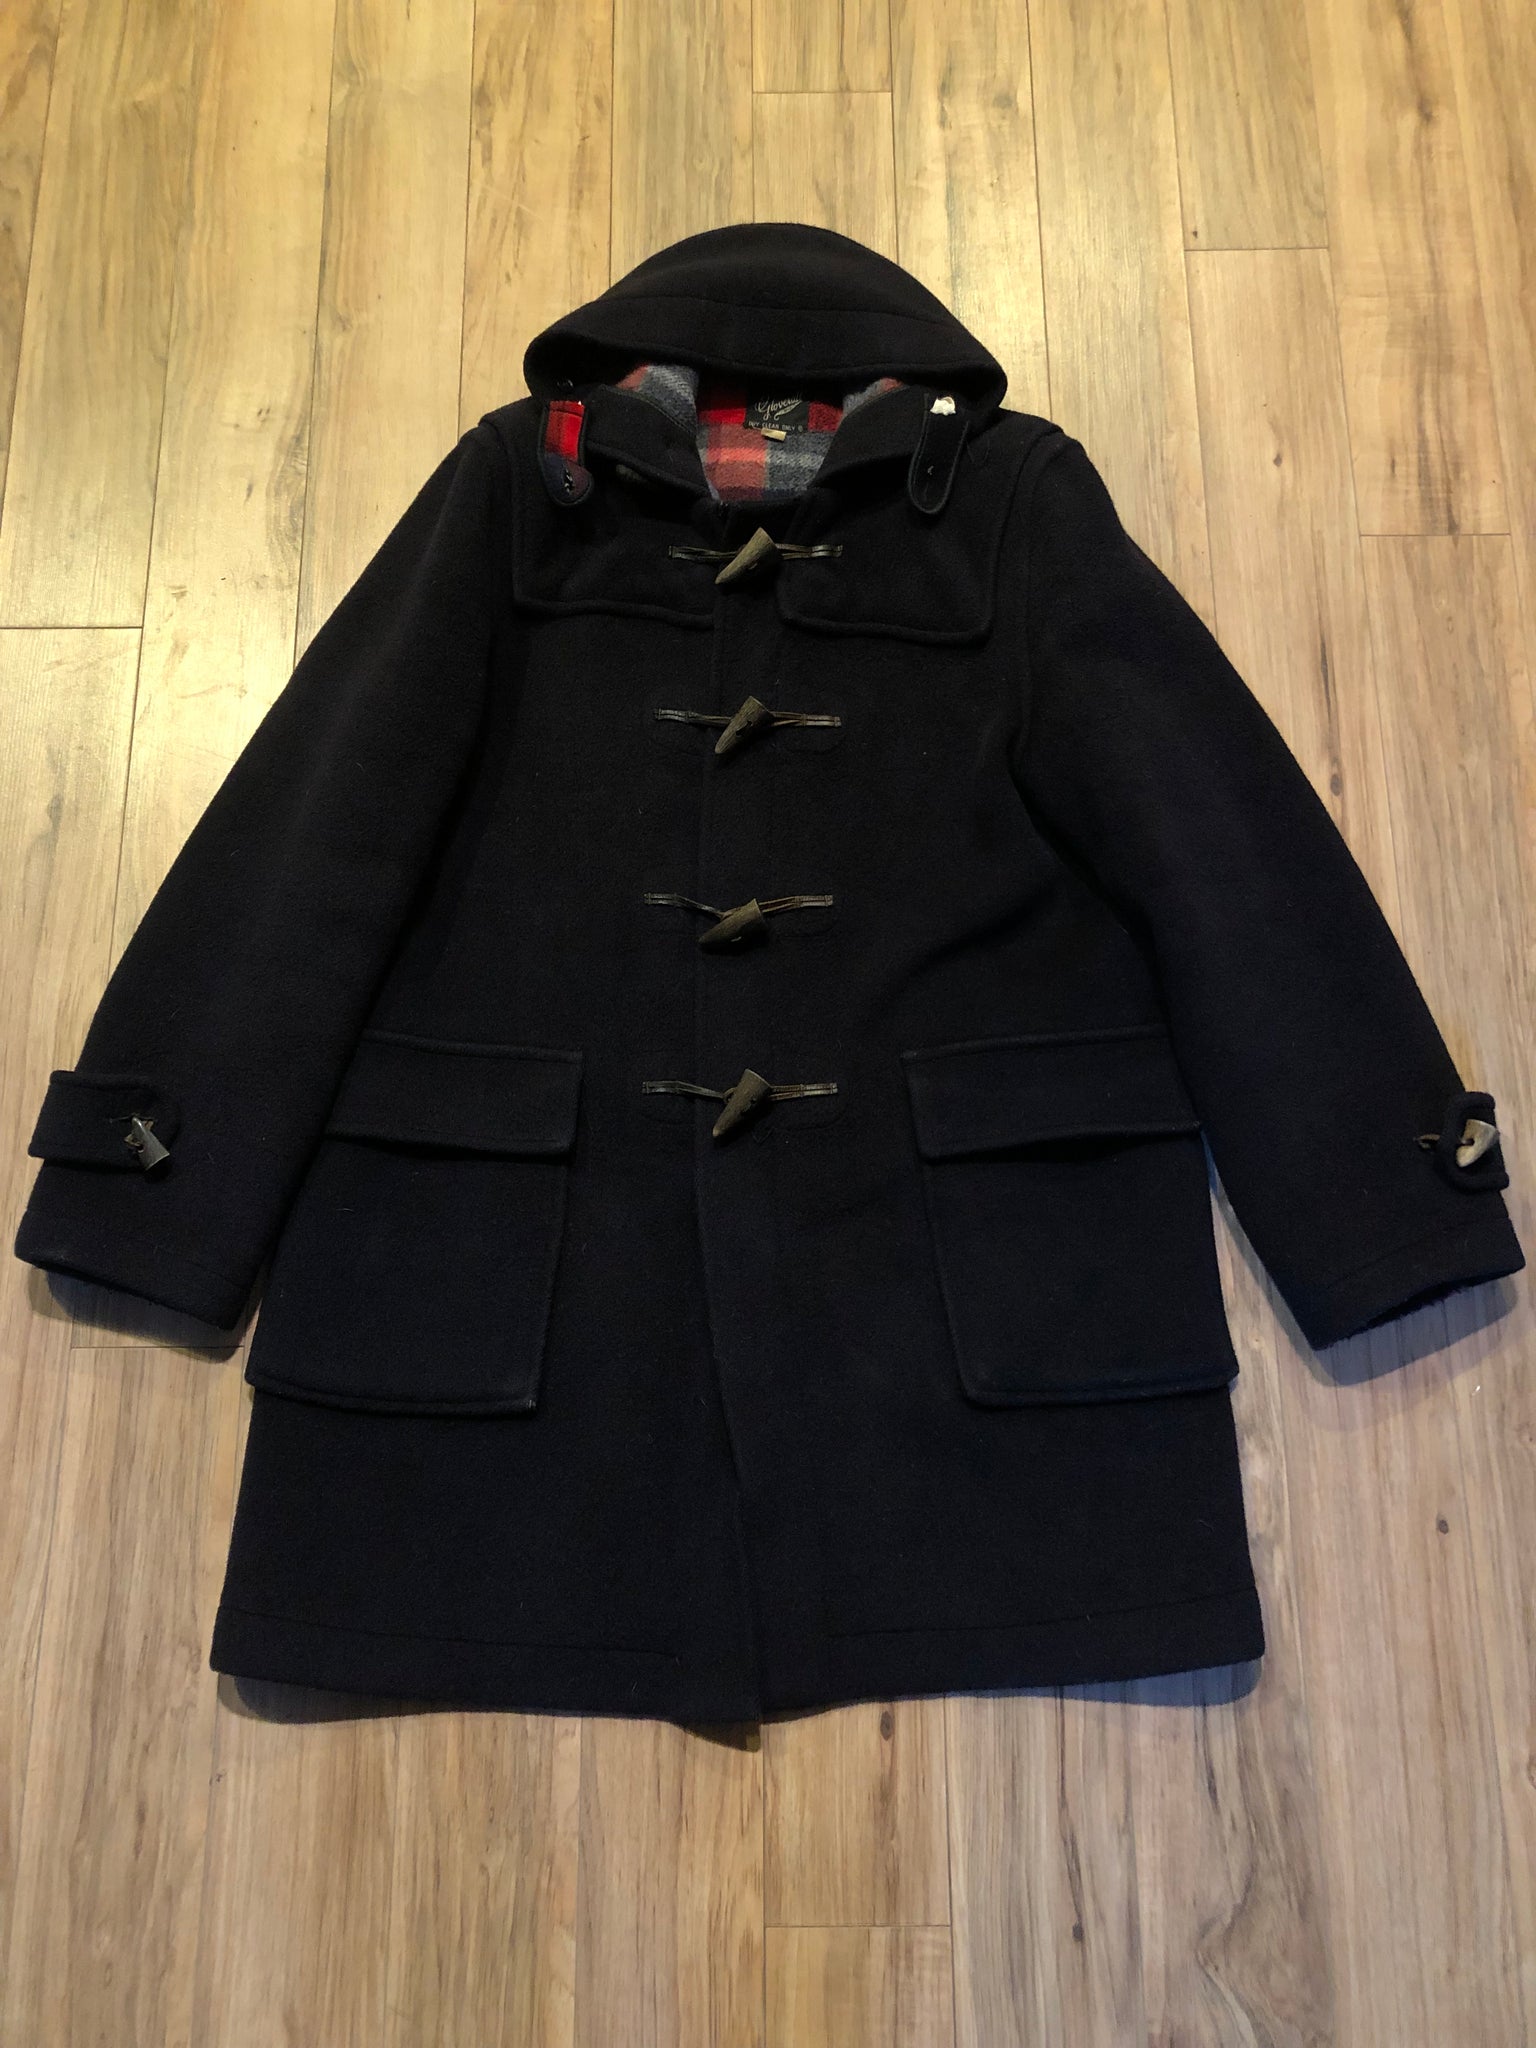 Vintage Navy Gloverall Duffle Coat, Made in England – KingsPIER